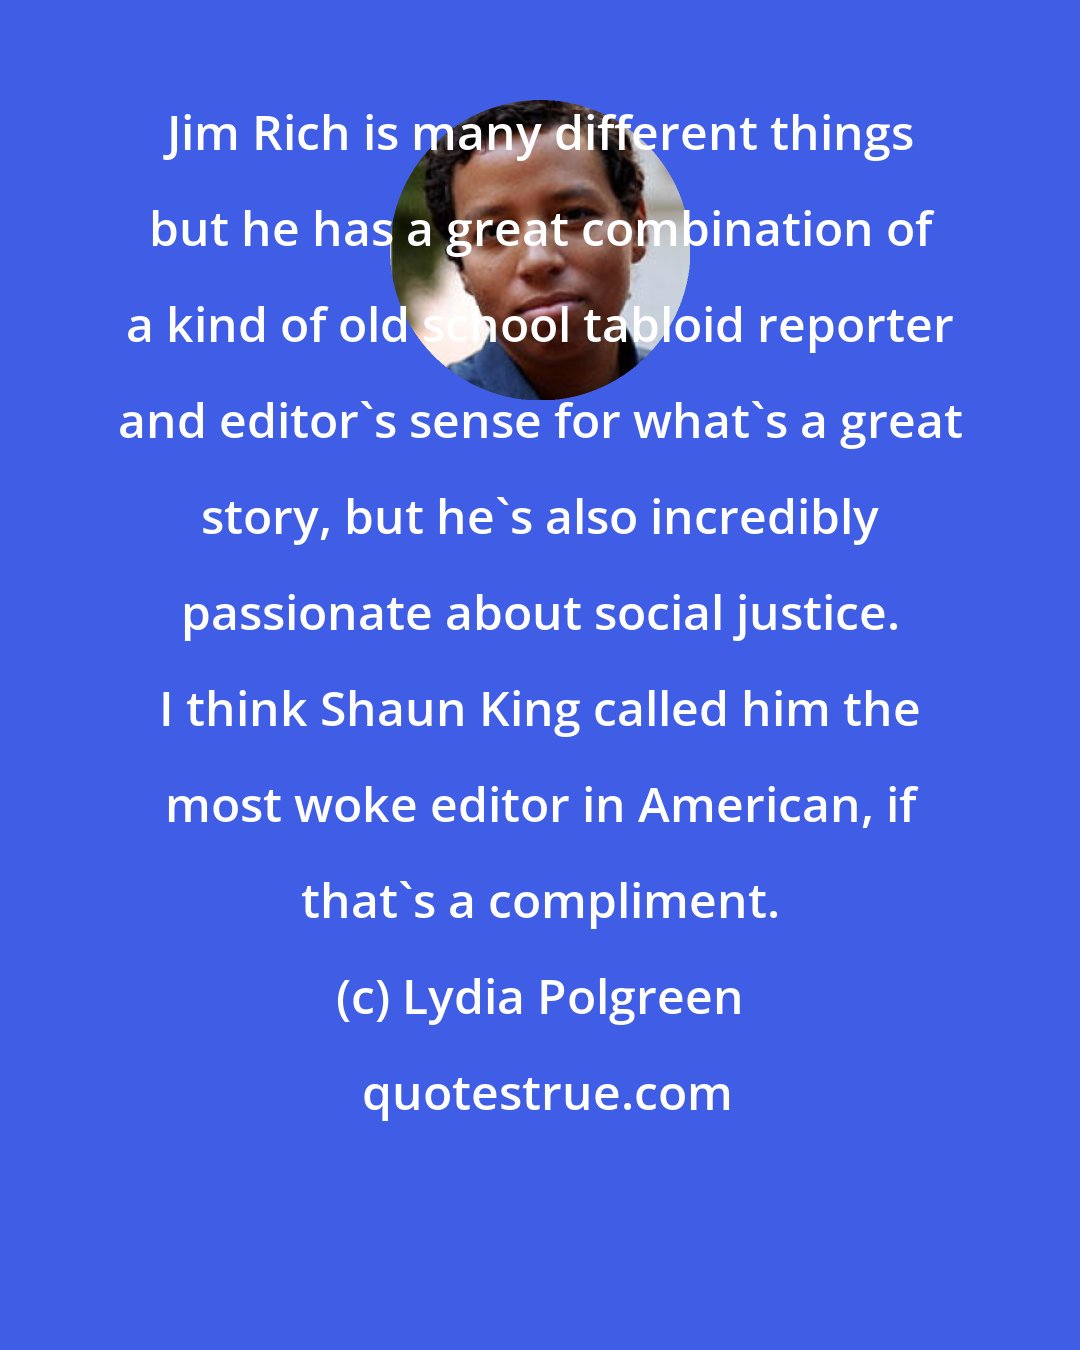 Lydia Polgreen: Jim Rich is many different things but he has a great combination of a kind of old school tabloid reporter and editor's sense for what's a great story, but he's also incredibly passionate about social justice. I think Shaun King called him the most woke editor in American, if that's a compliment.